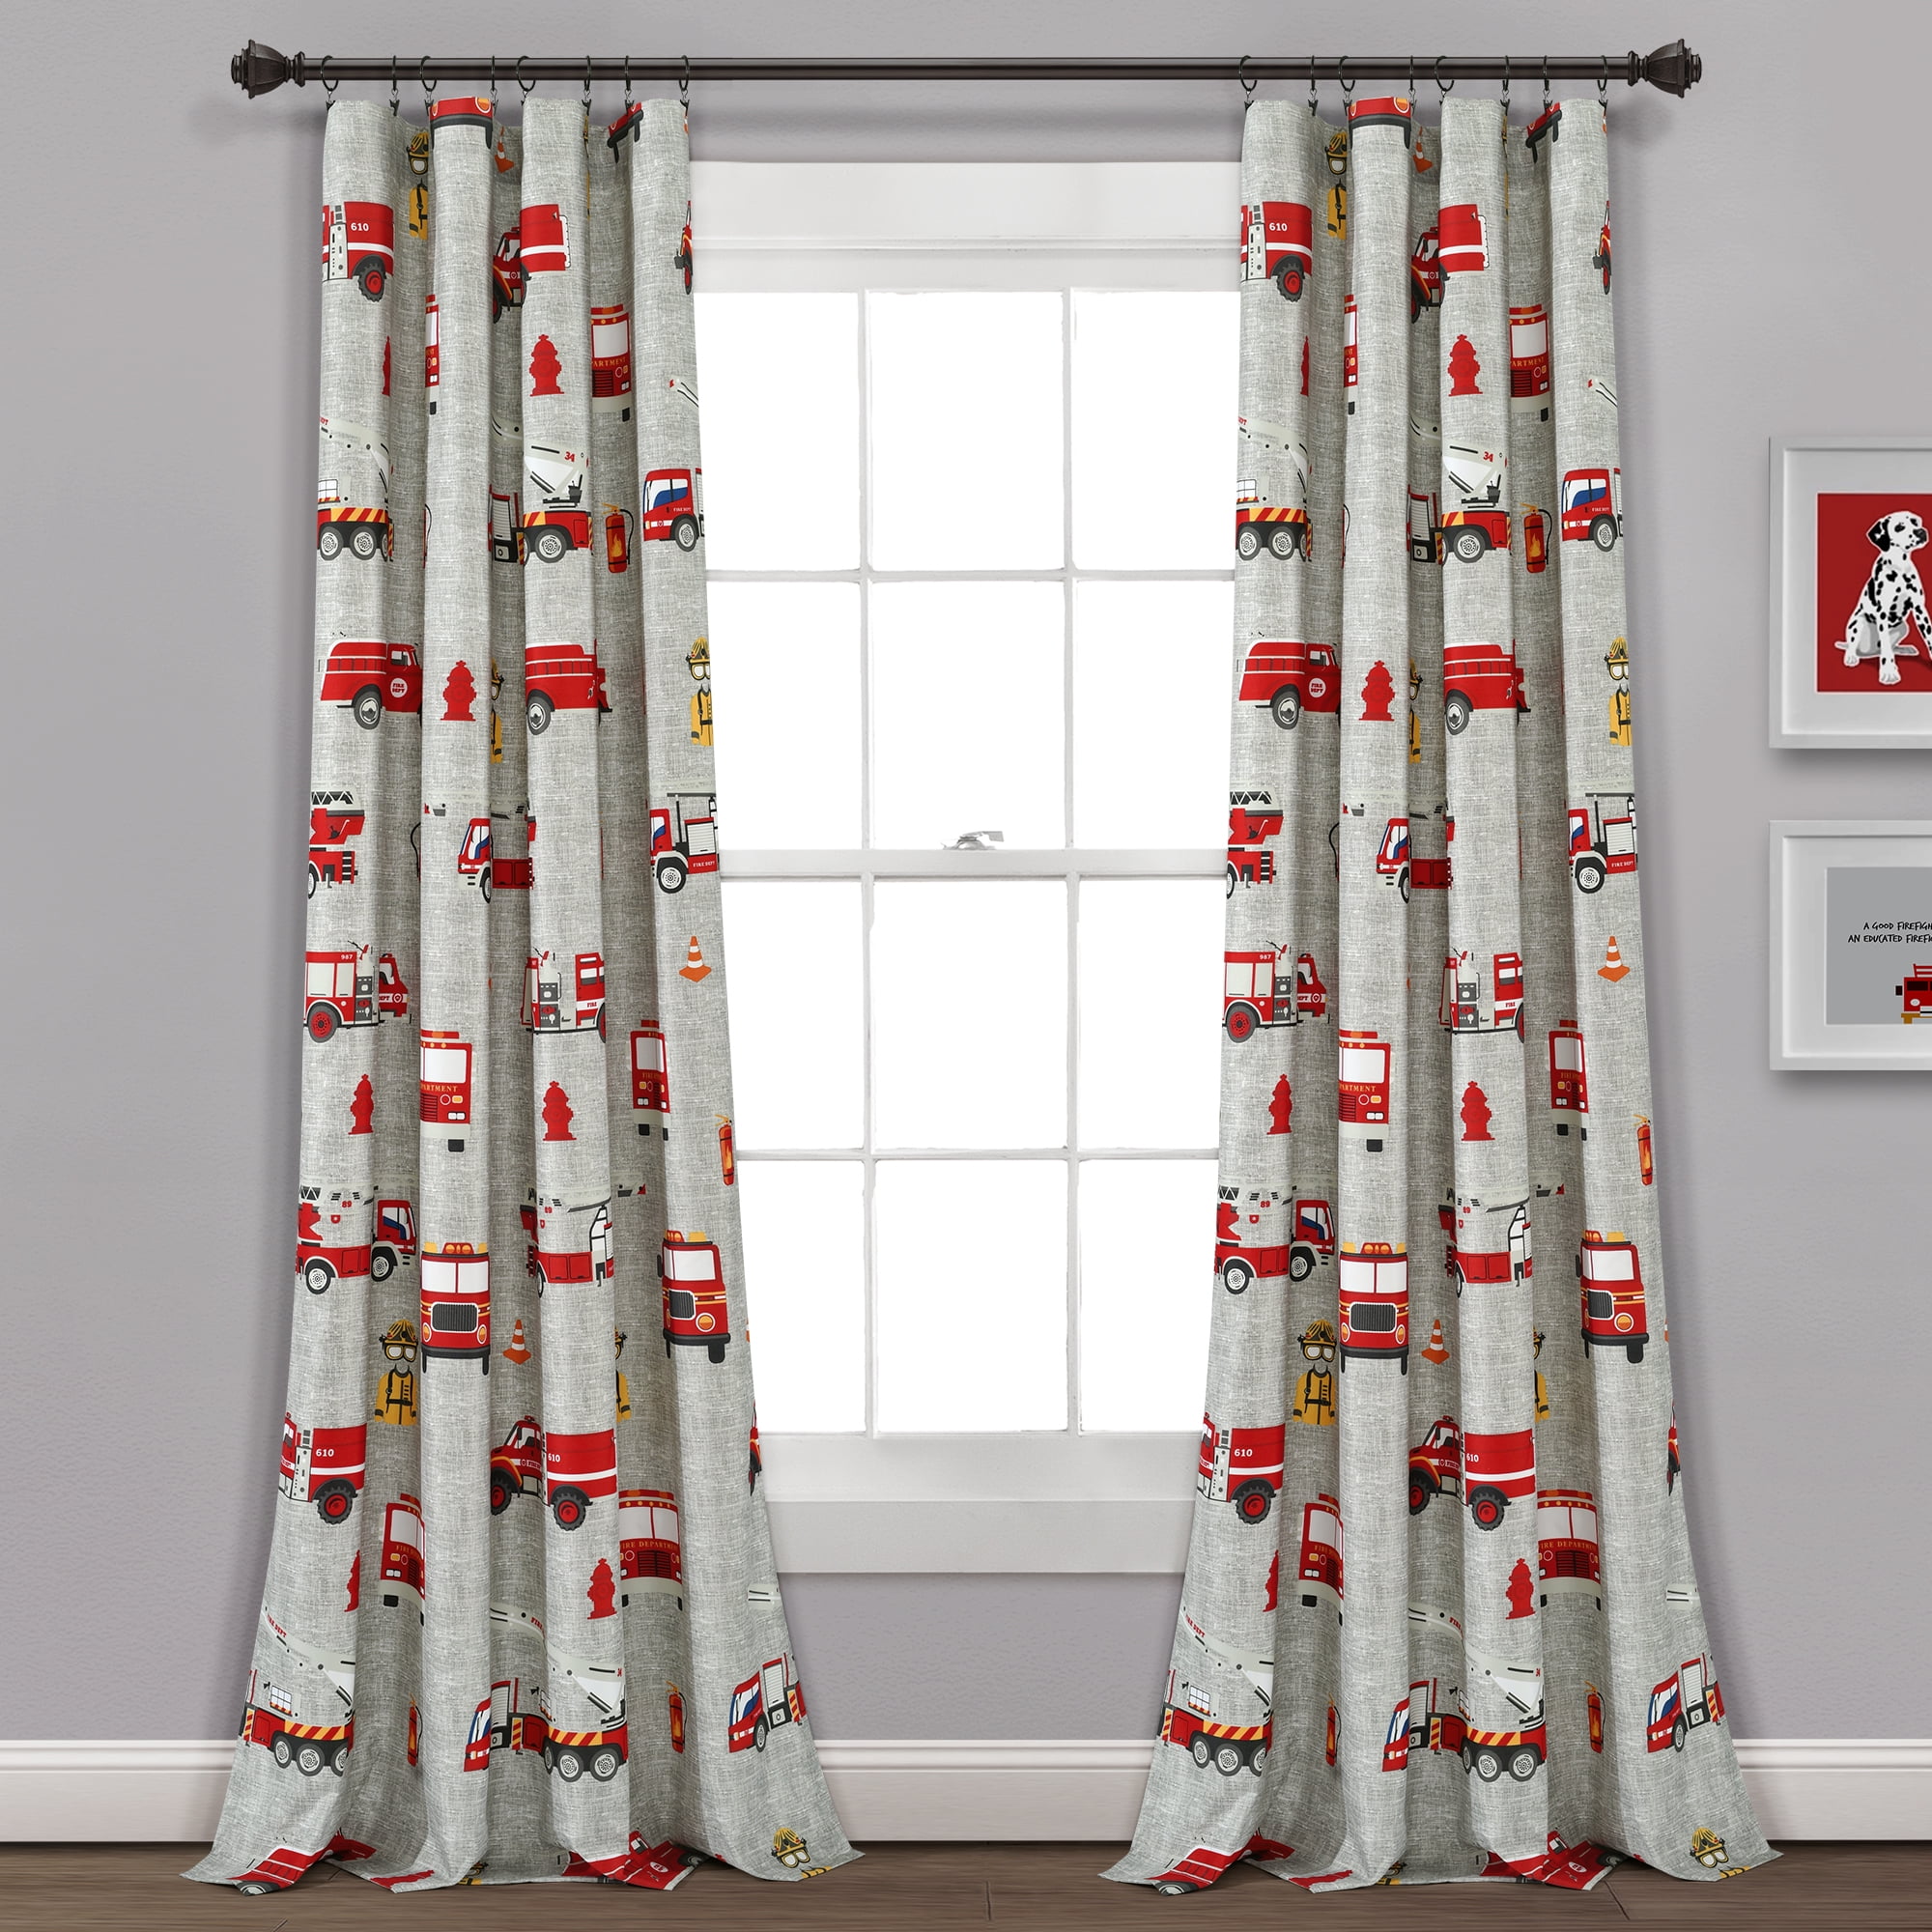 STAR WARS HEROES WINDOW DECORATIONS DISNEY VOILE READY MADE KIDS NET CURTAINS 